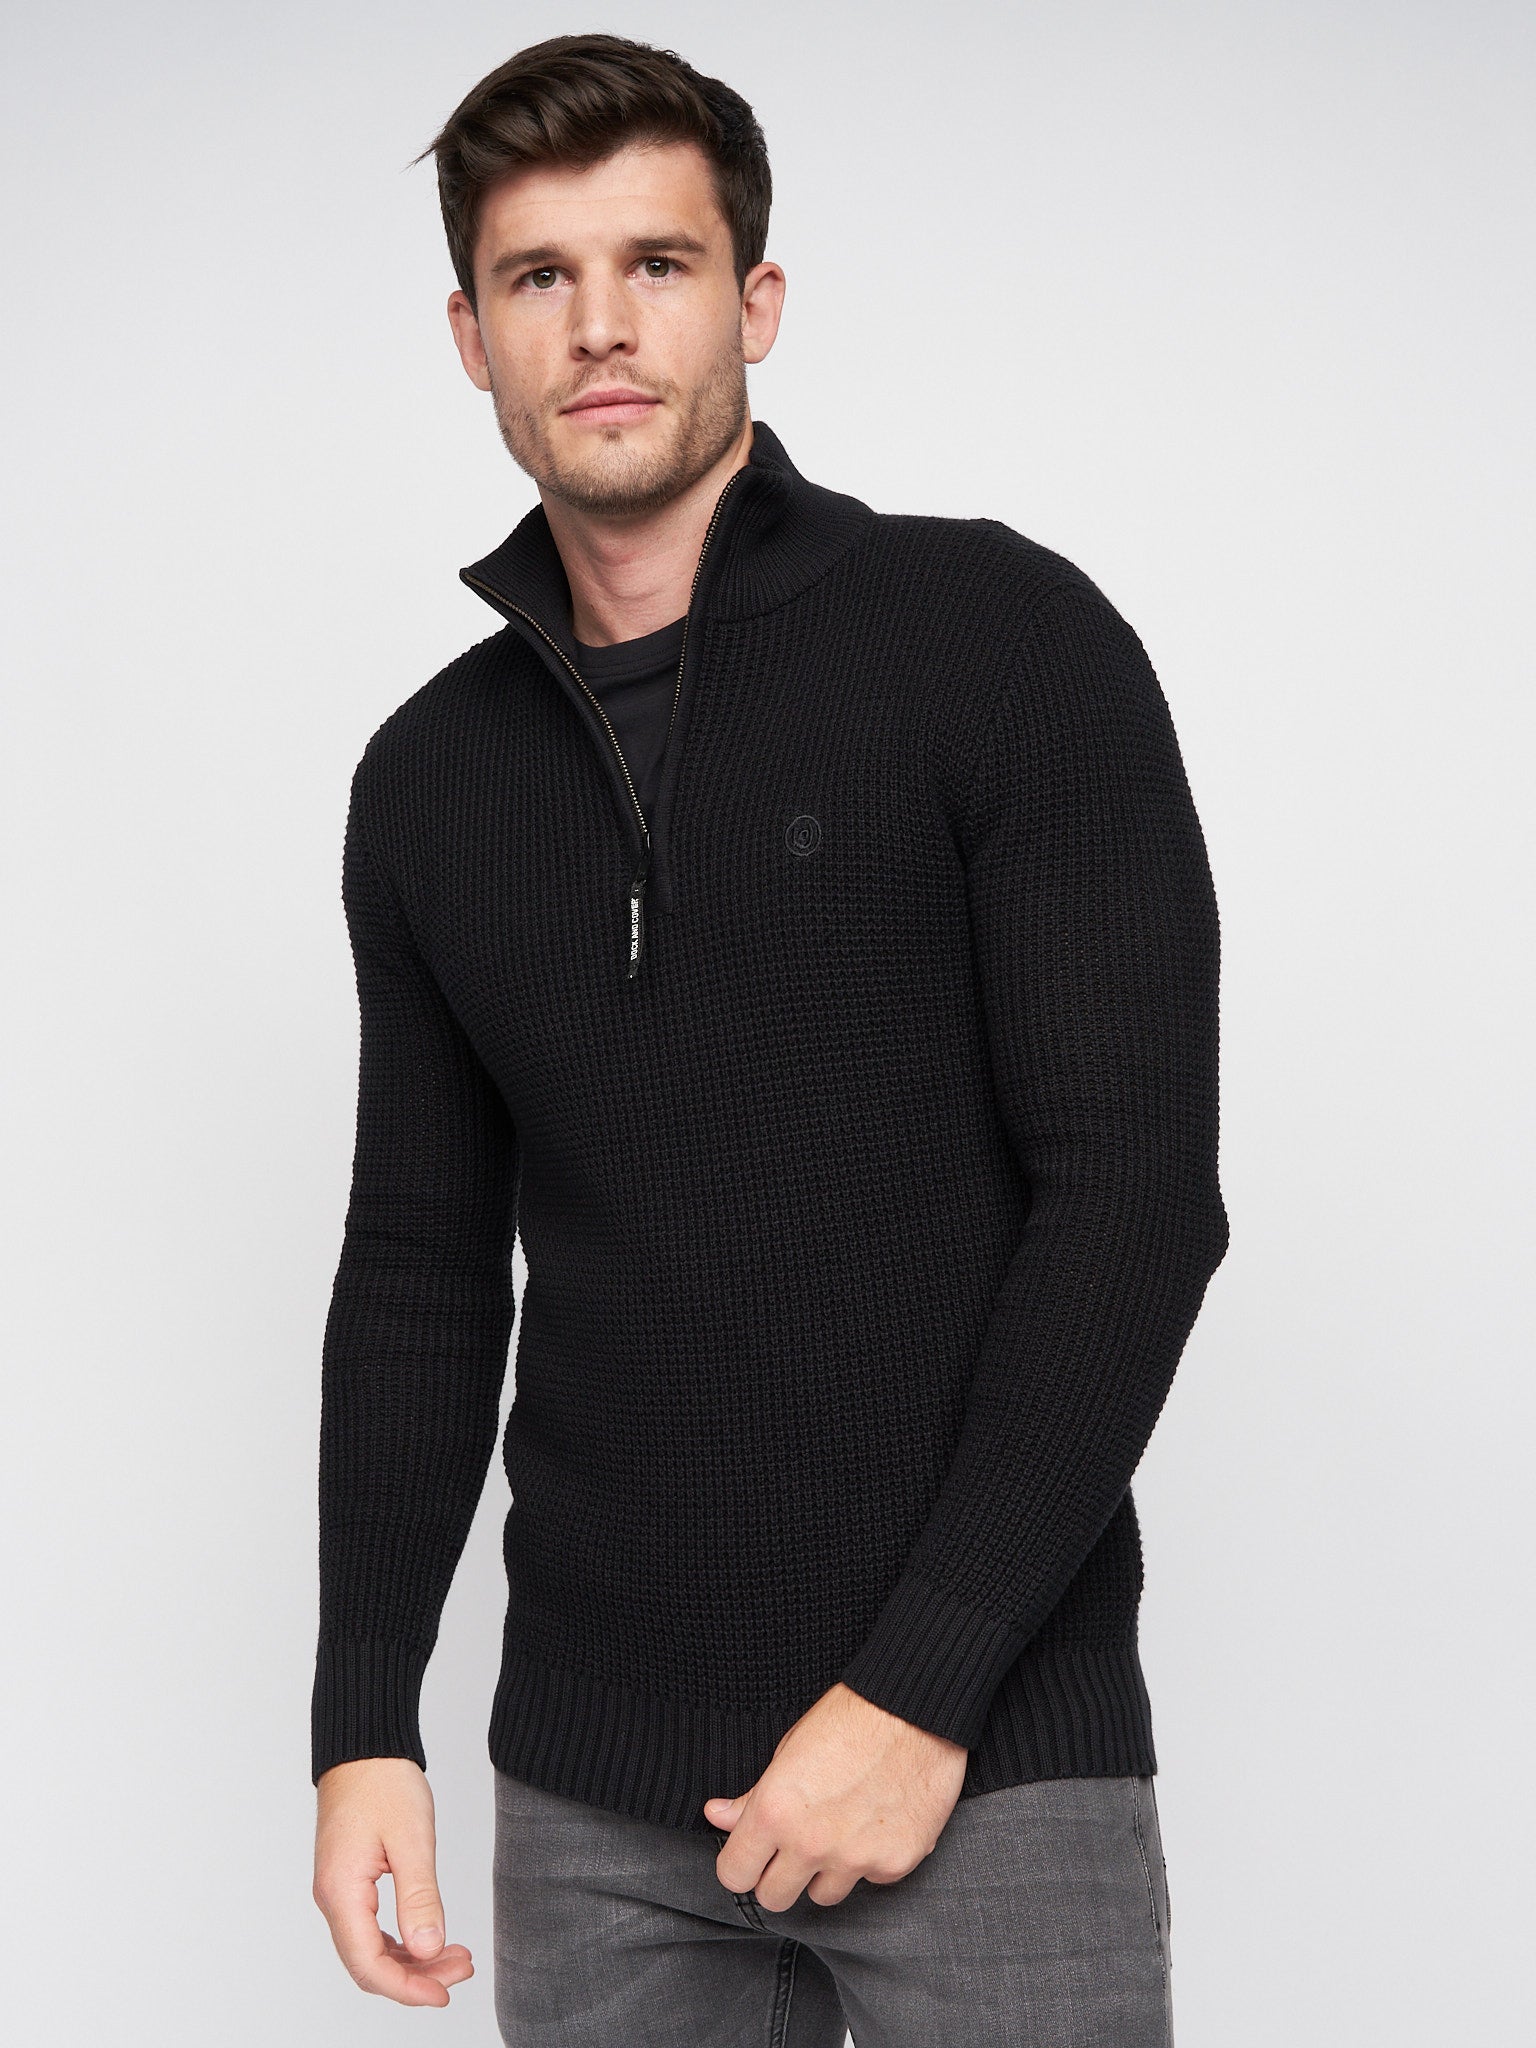 Duck & Cover - Mens Firegards 1/4 Zip Knit Black – Duck and Cover